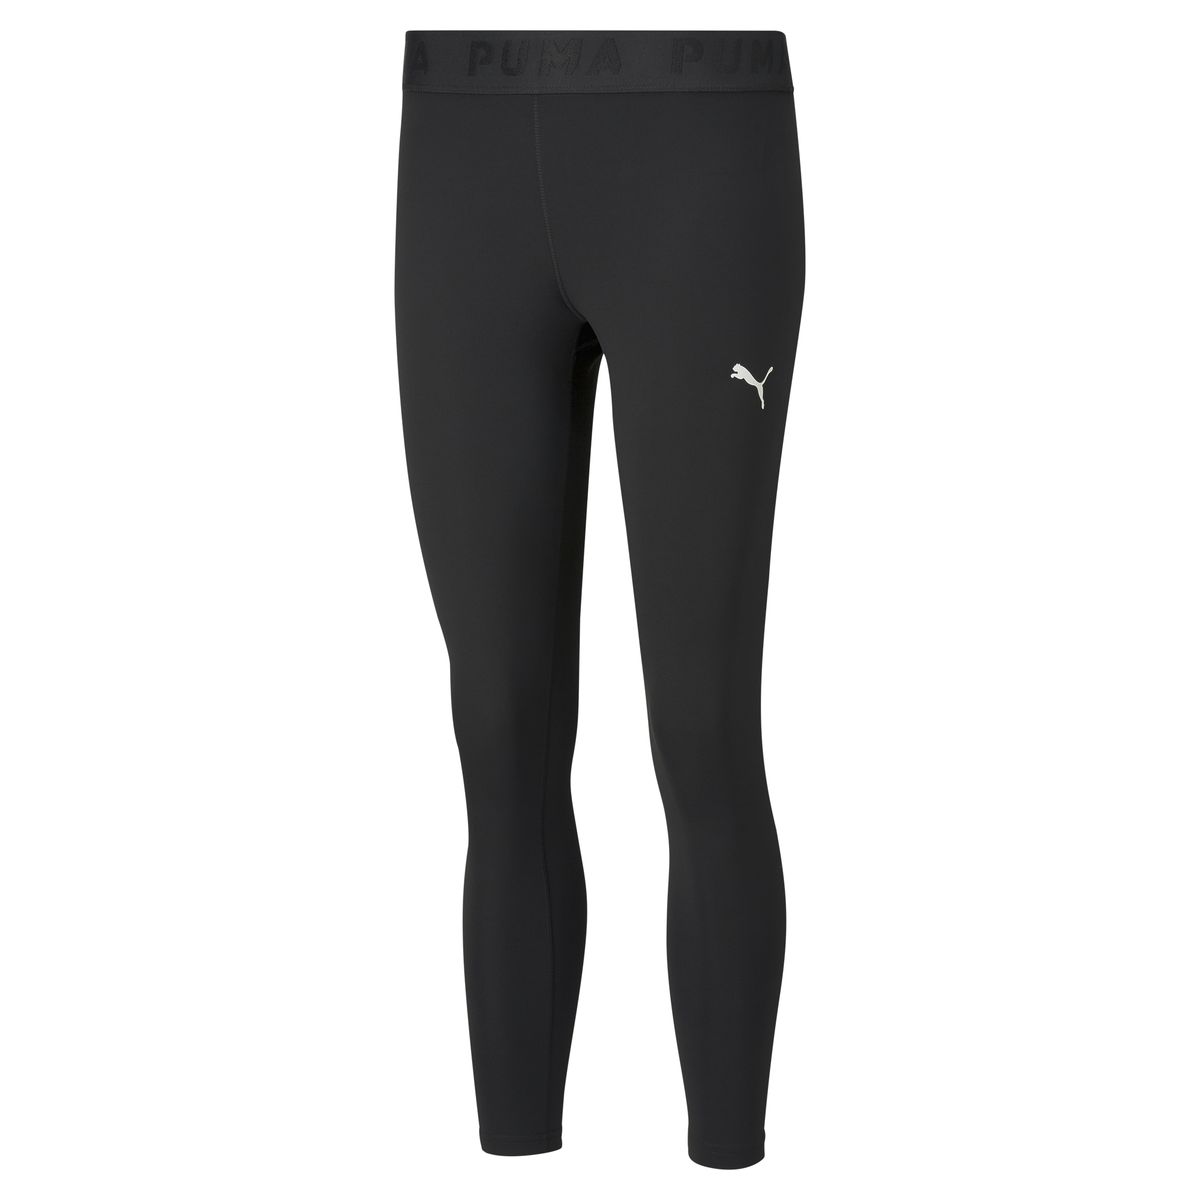 Puma - Women's Modern Sports 7 8 Tights | Buy Online in South Africa ...